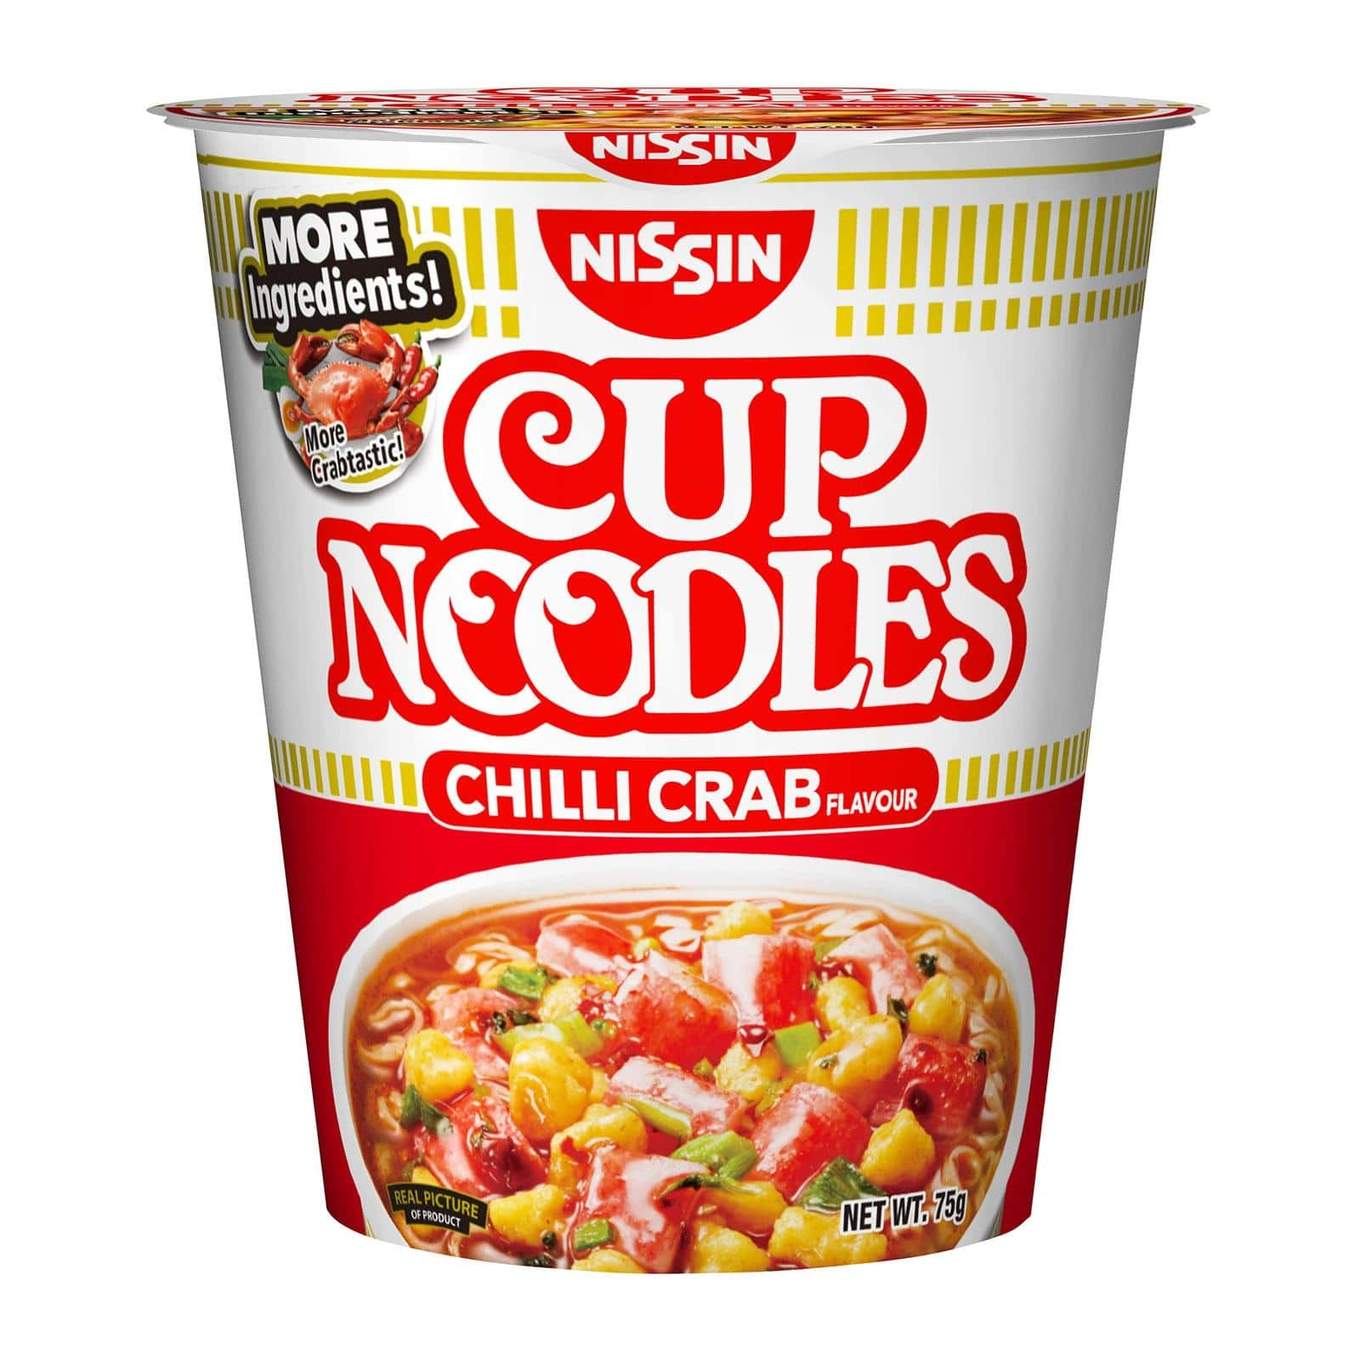 10 Nissin Cup Noodle Flavours That Will Blow Your Mind - Klook Travel Blog